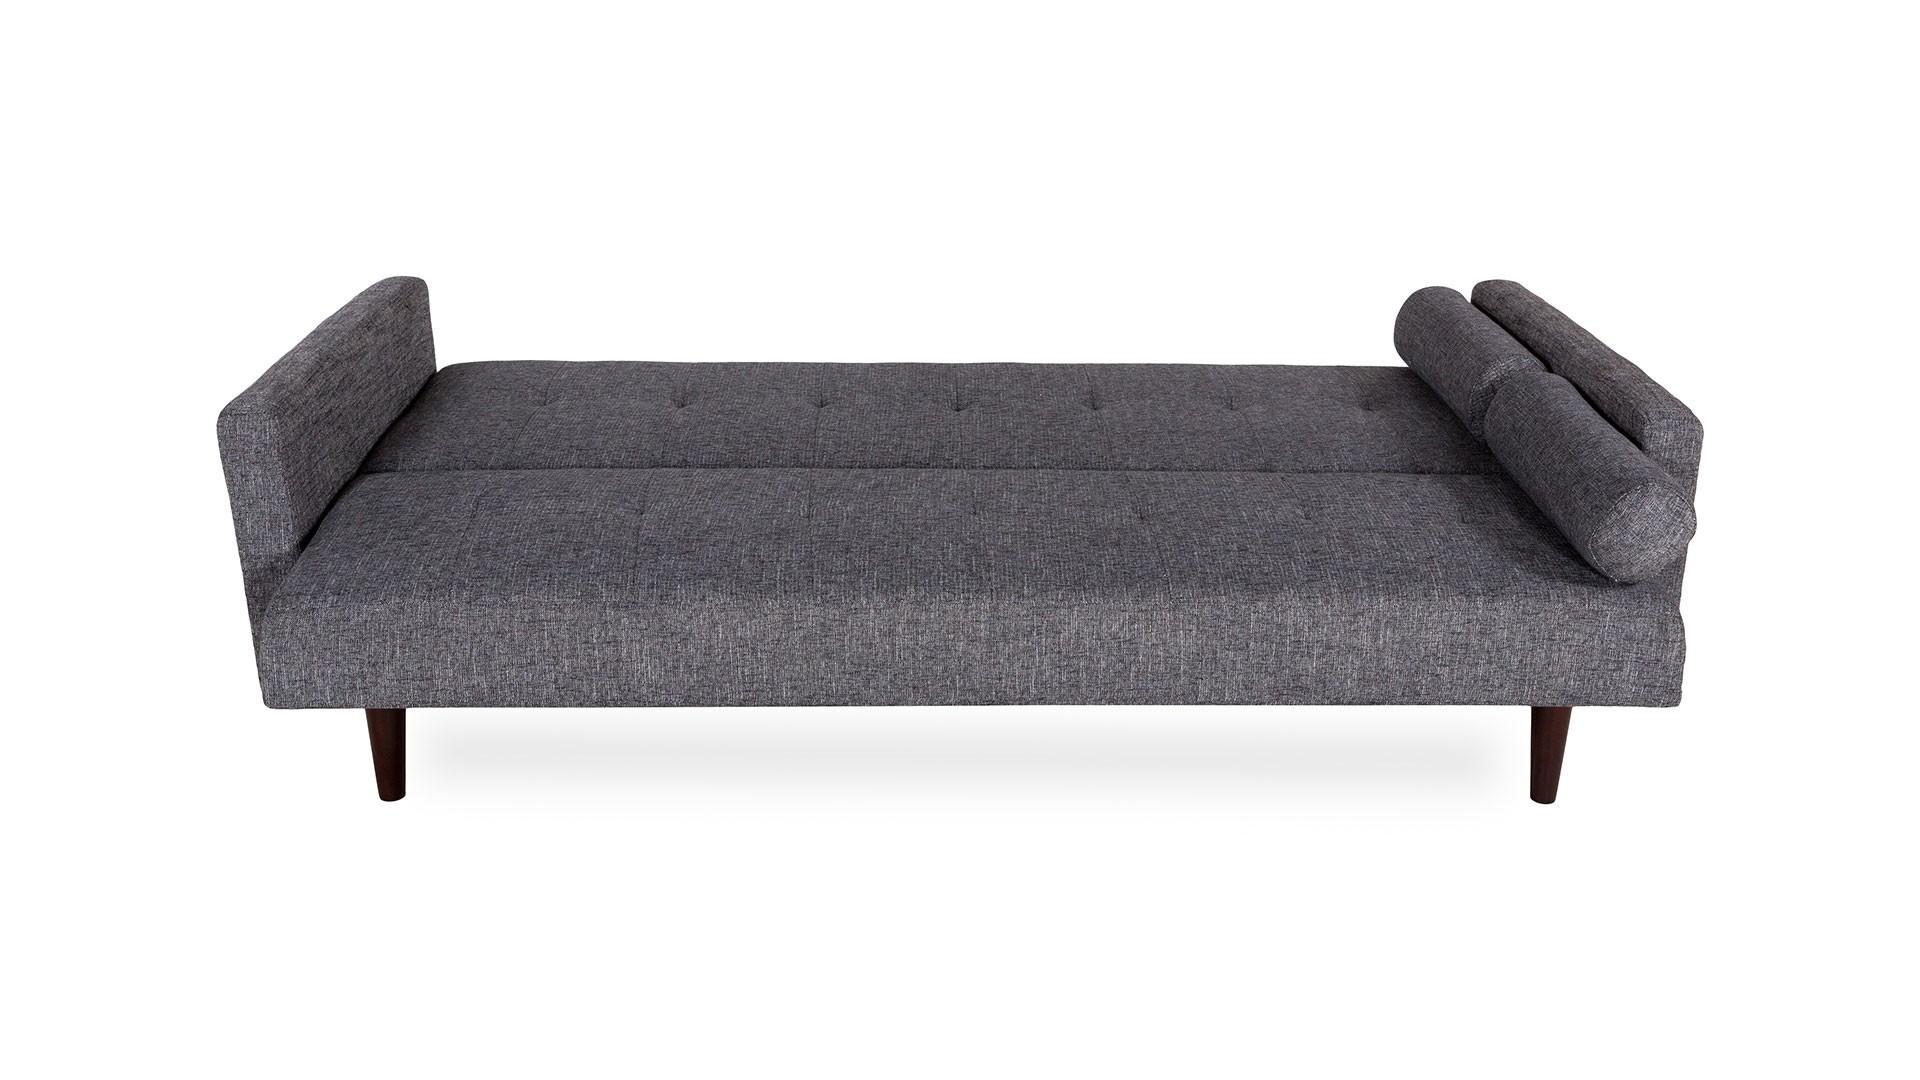 

    
At Home USA VItalia Sofa Sleeper in Grey Tufted Buttons Contemporary Style
